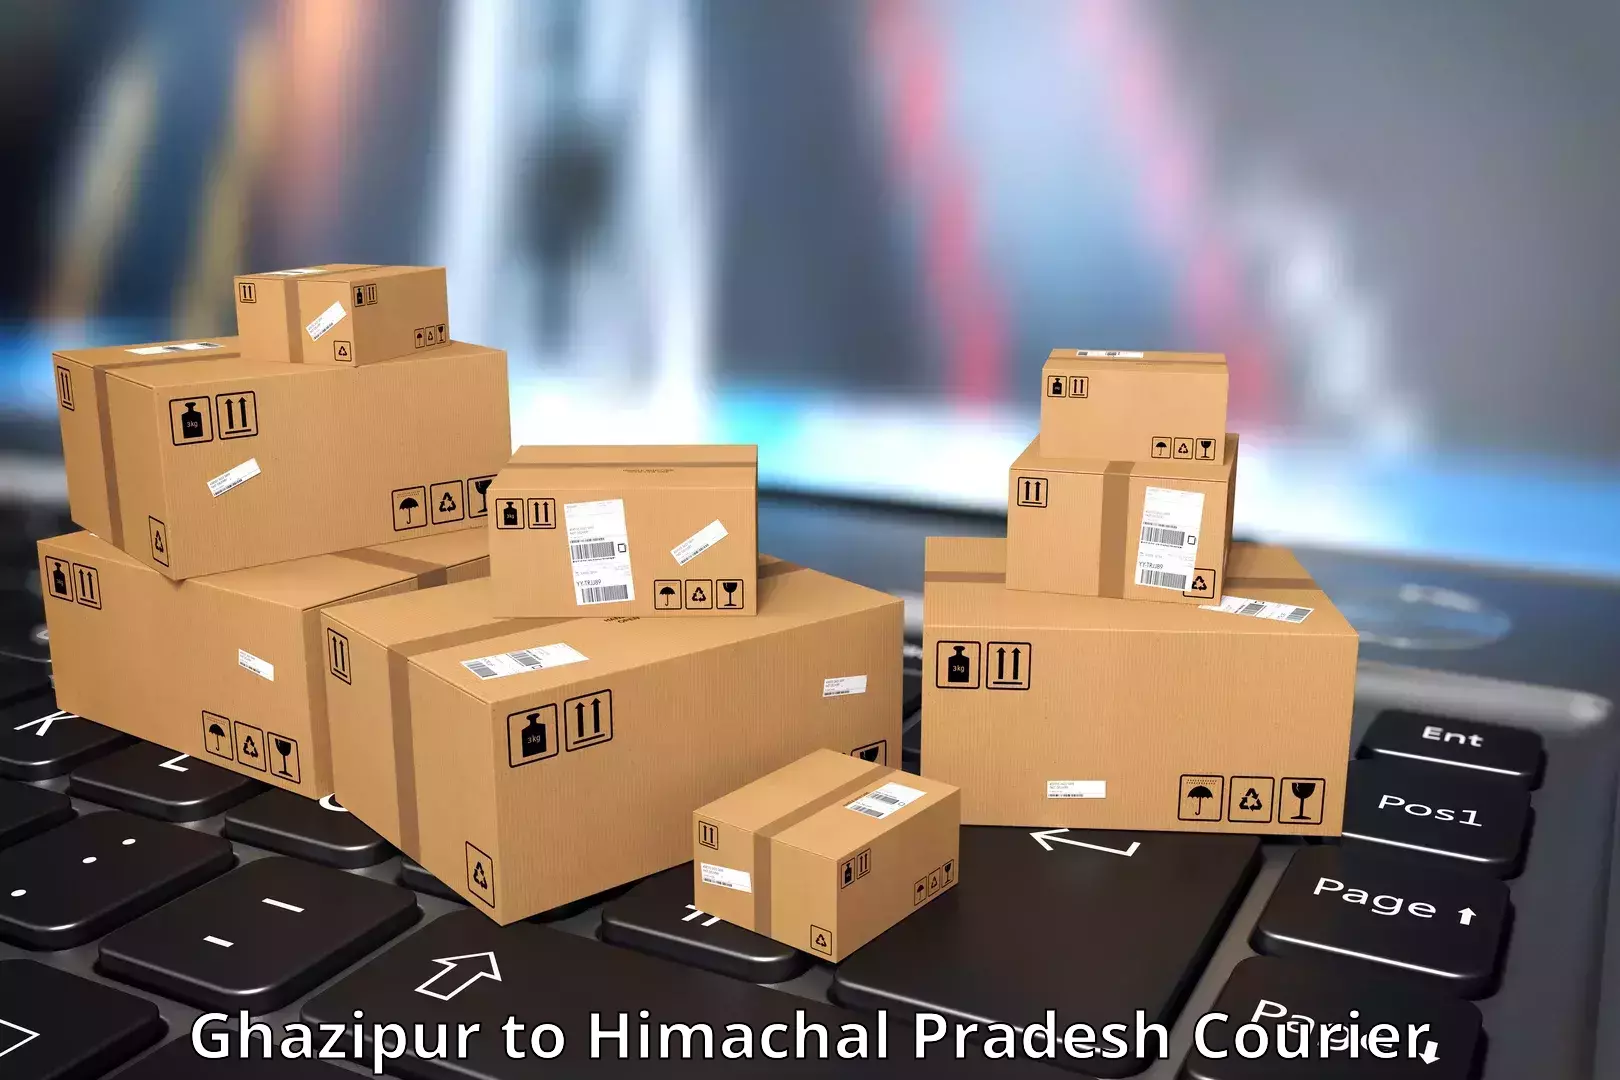 Courier service innovation Ghazipur to Kangra